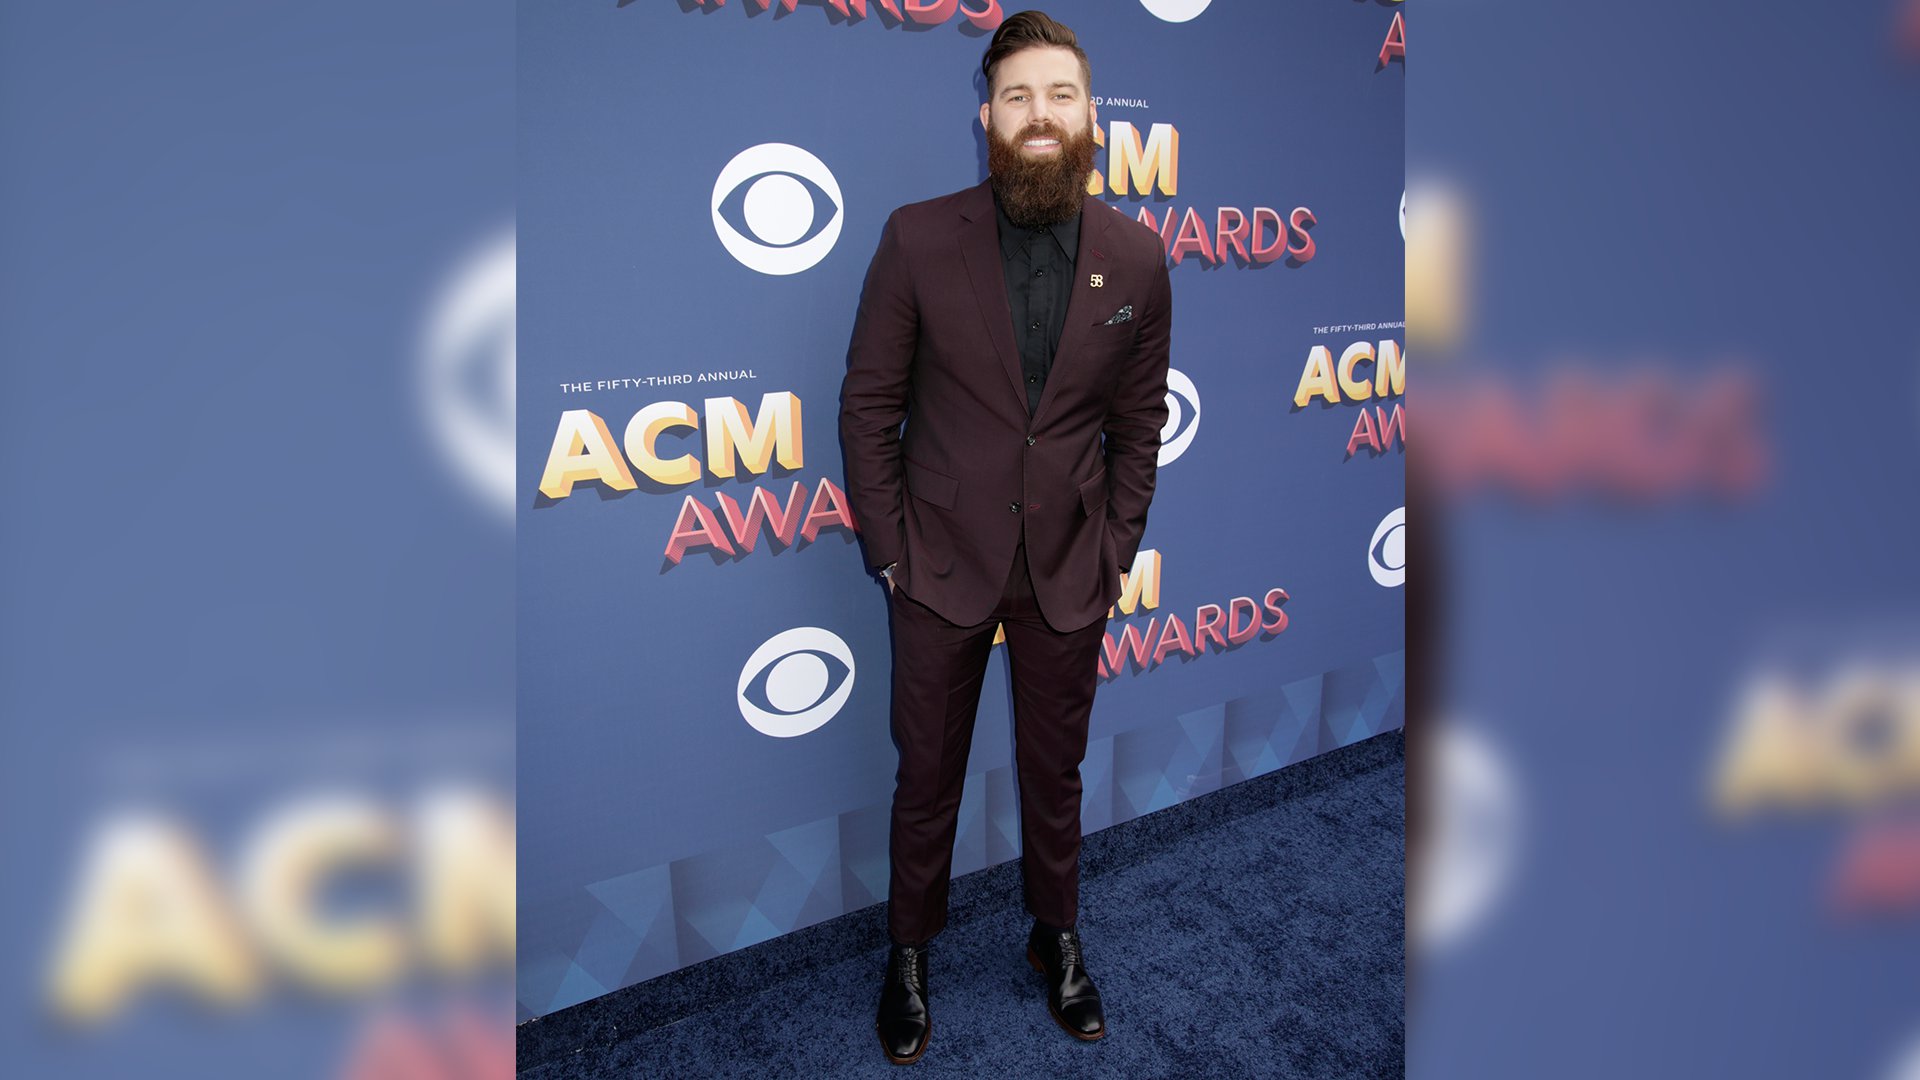 Hot off the recent release of his debut LP, Jordan Davis found time to saunter down the ACM red carpet.